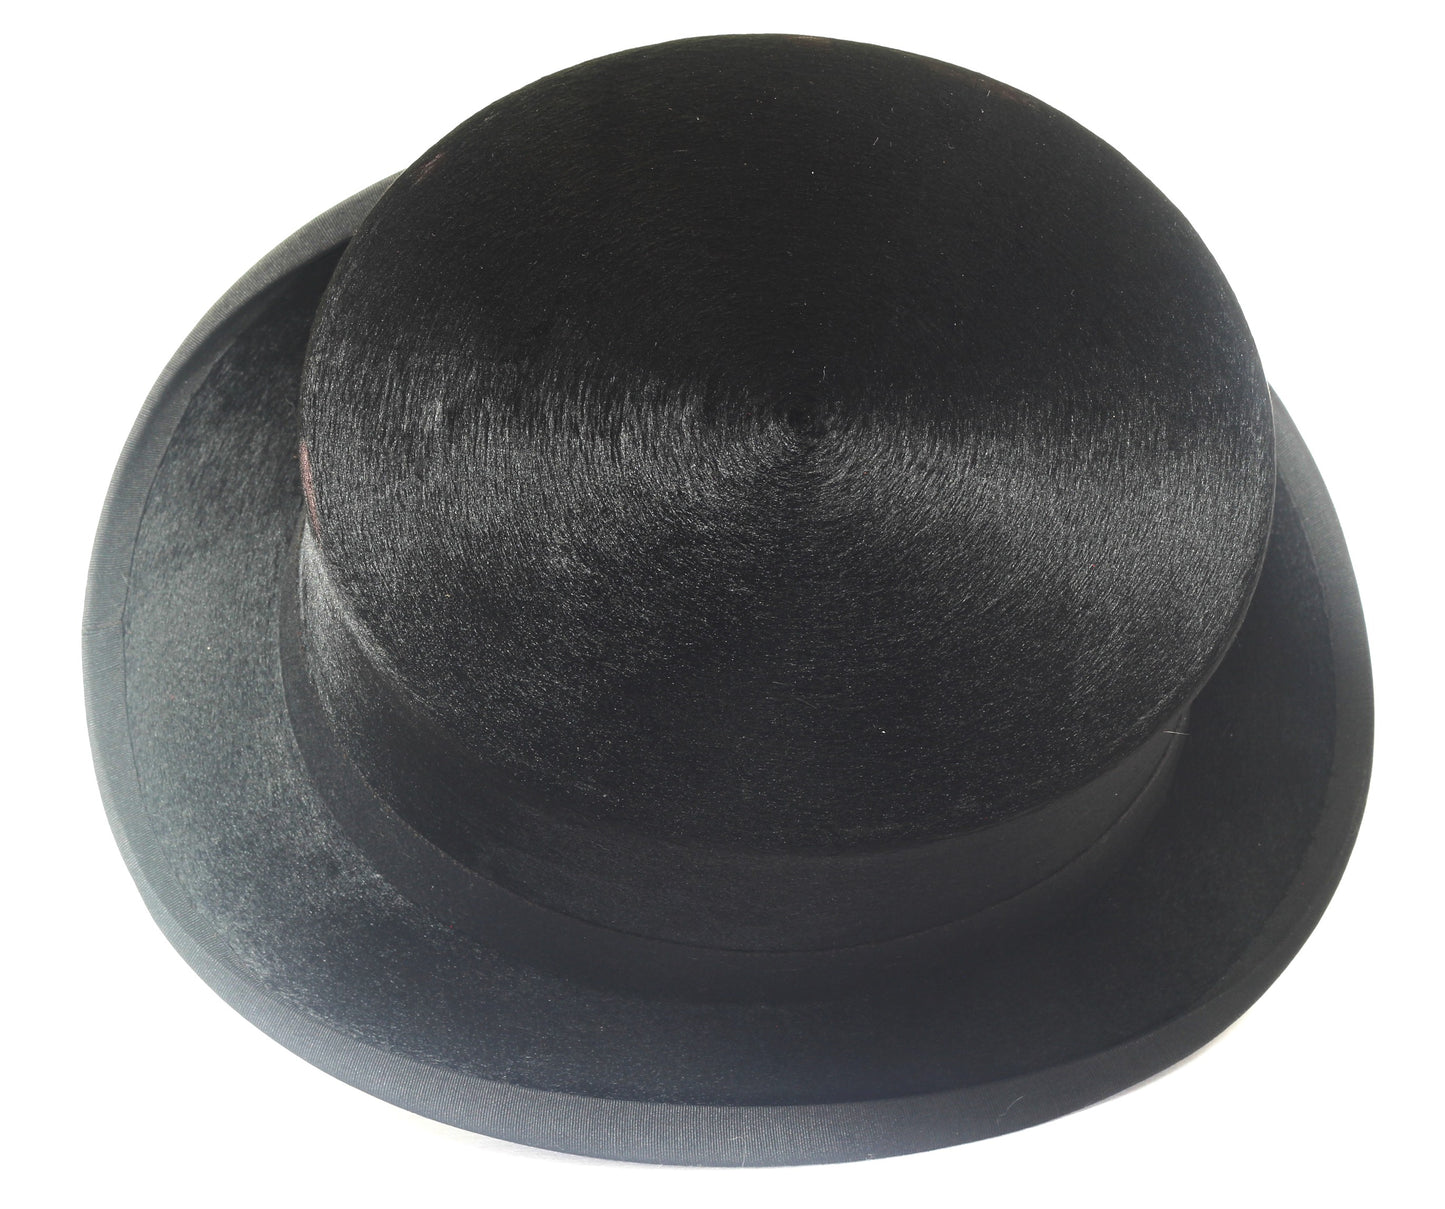 Vintage Silk Top Hat Size 7⅛-7¼ in Leather Hat Box - Tophat023